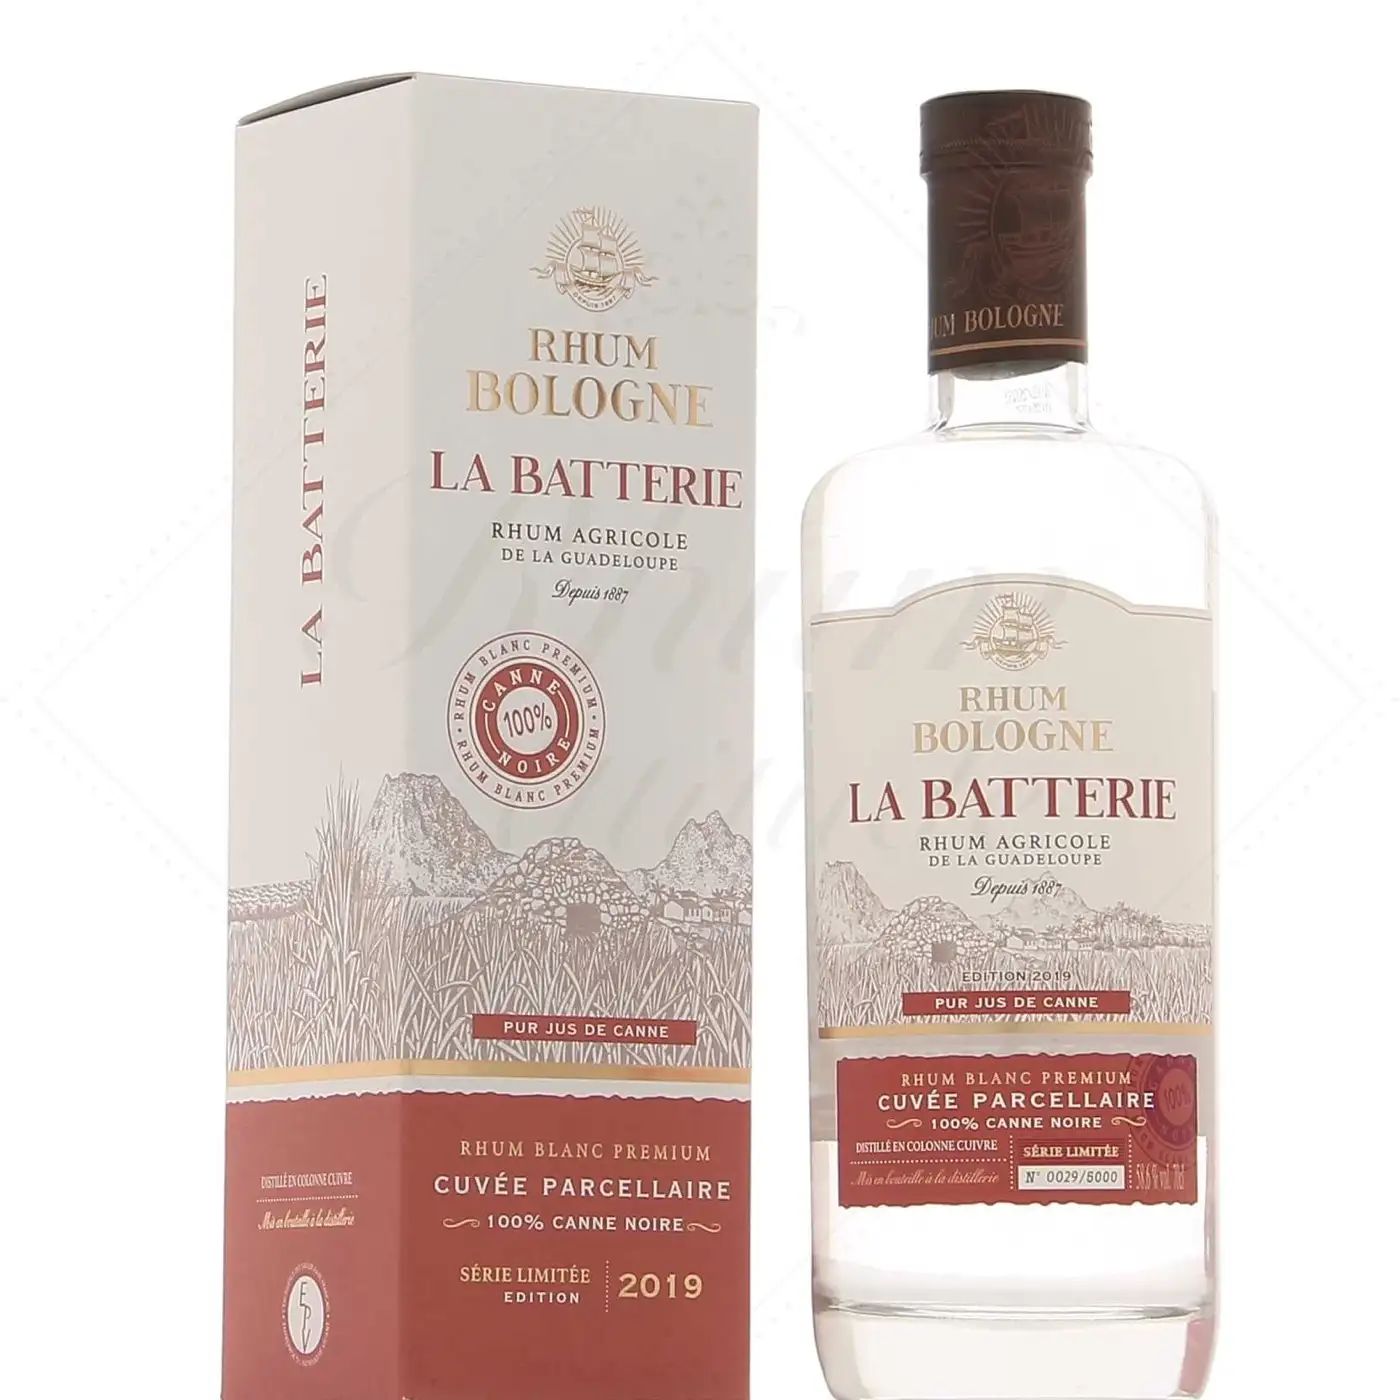 Image of the front of the bottle of the rum La Batterie